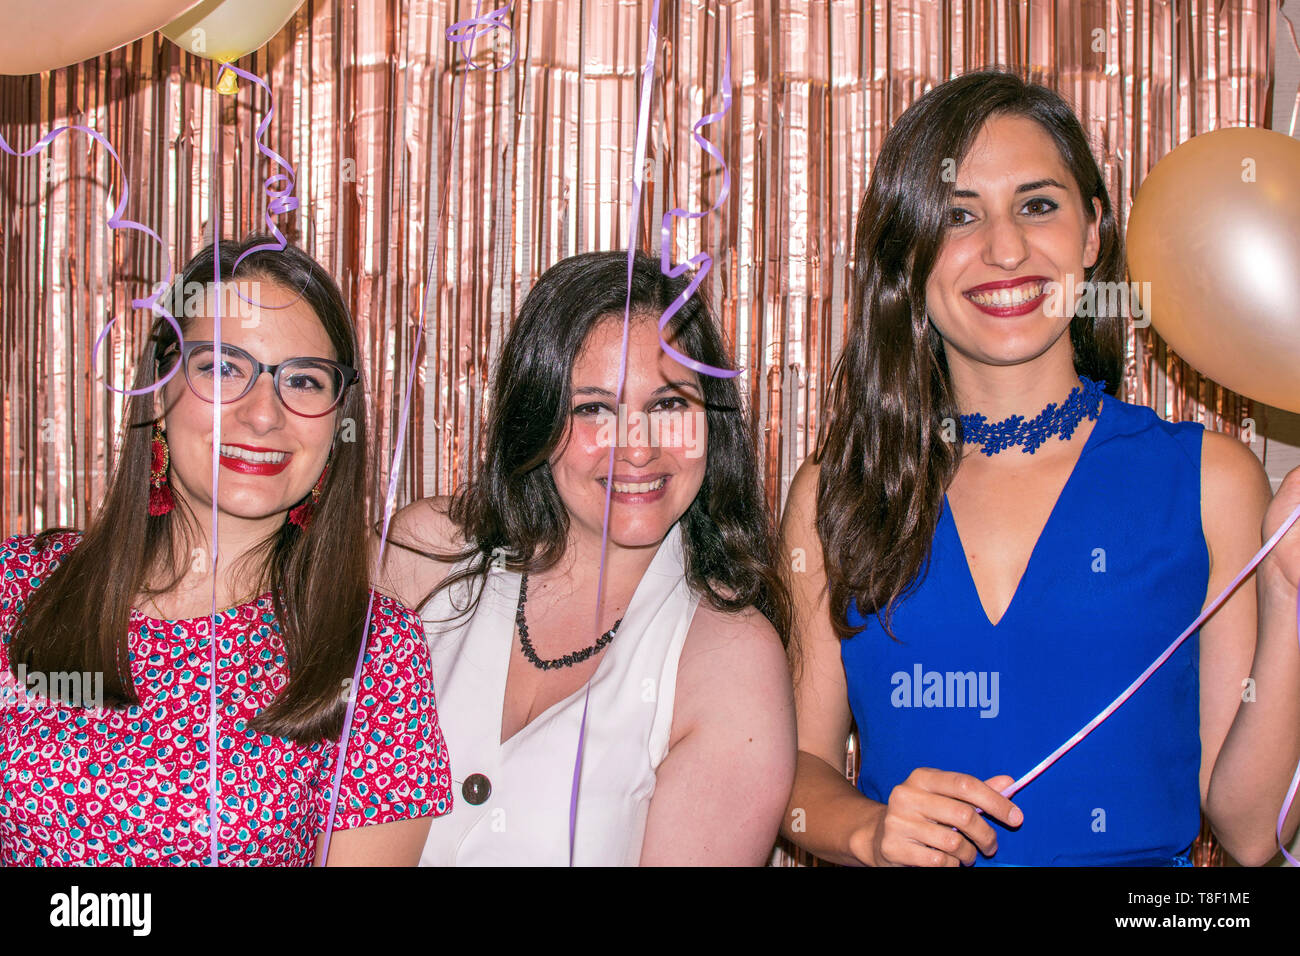 Murcia, Spain May 12, 2019: Birthday friends parties. Attractive women celebrate special dates. Familiar gathering. Happy woman smile with balloons at a party. Stock Photo